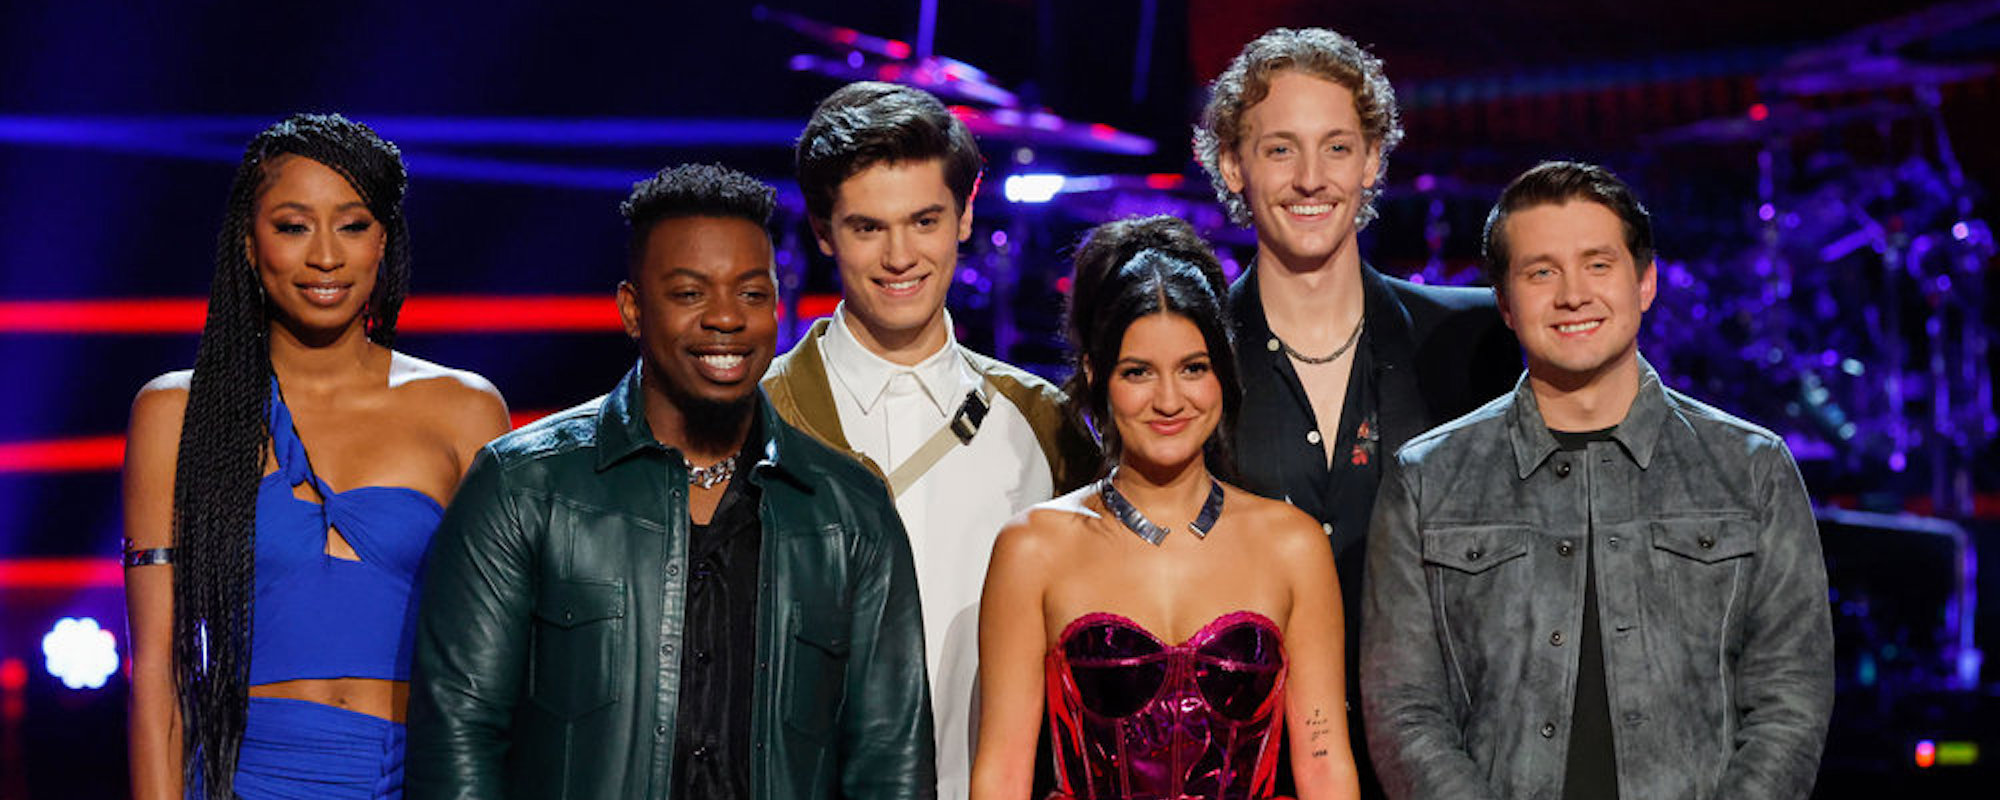 'The Voice' Finale Who are the 5 Artists Remaining? American Songwriter